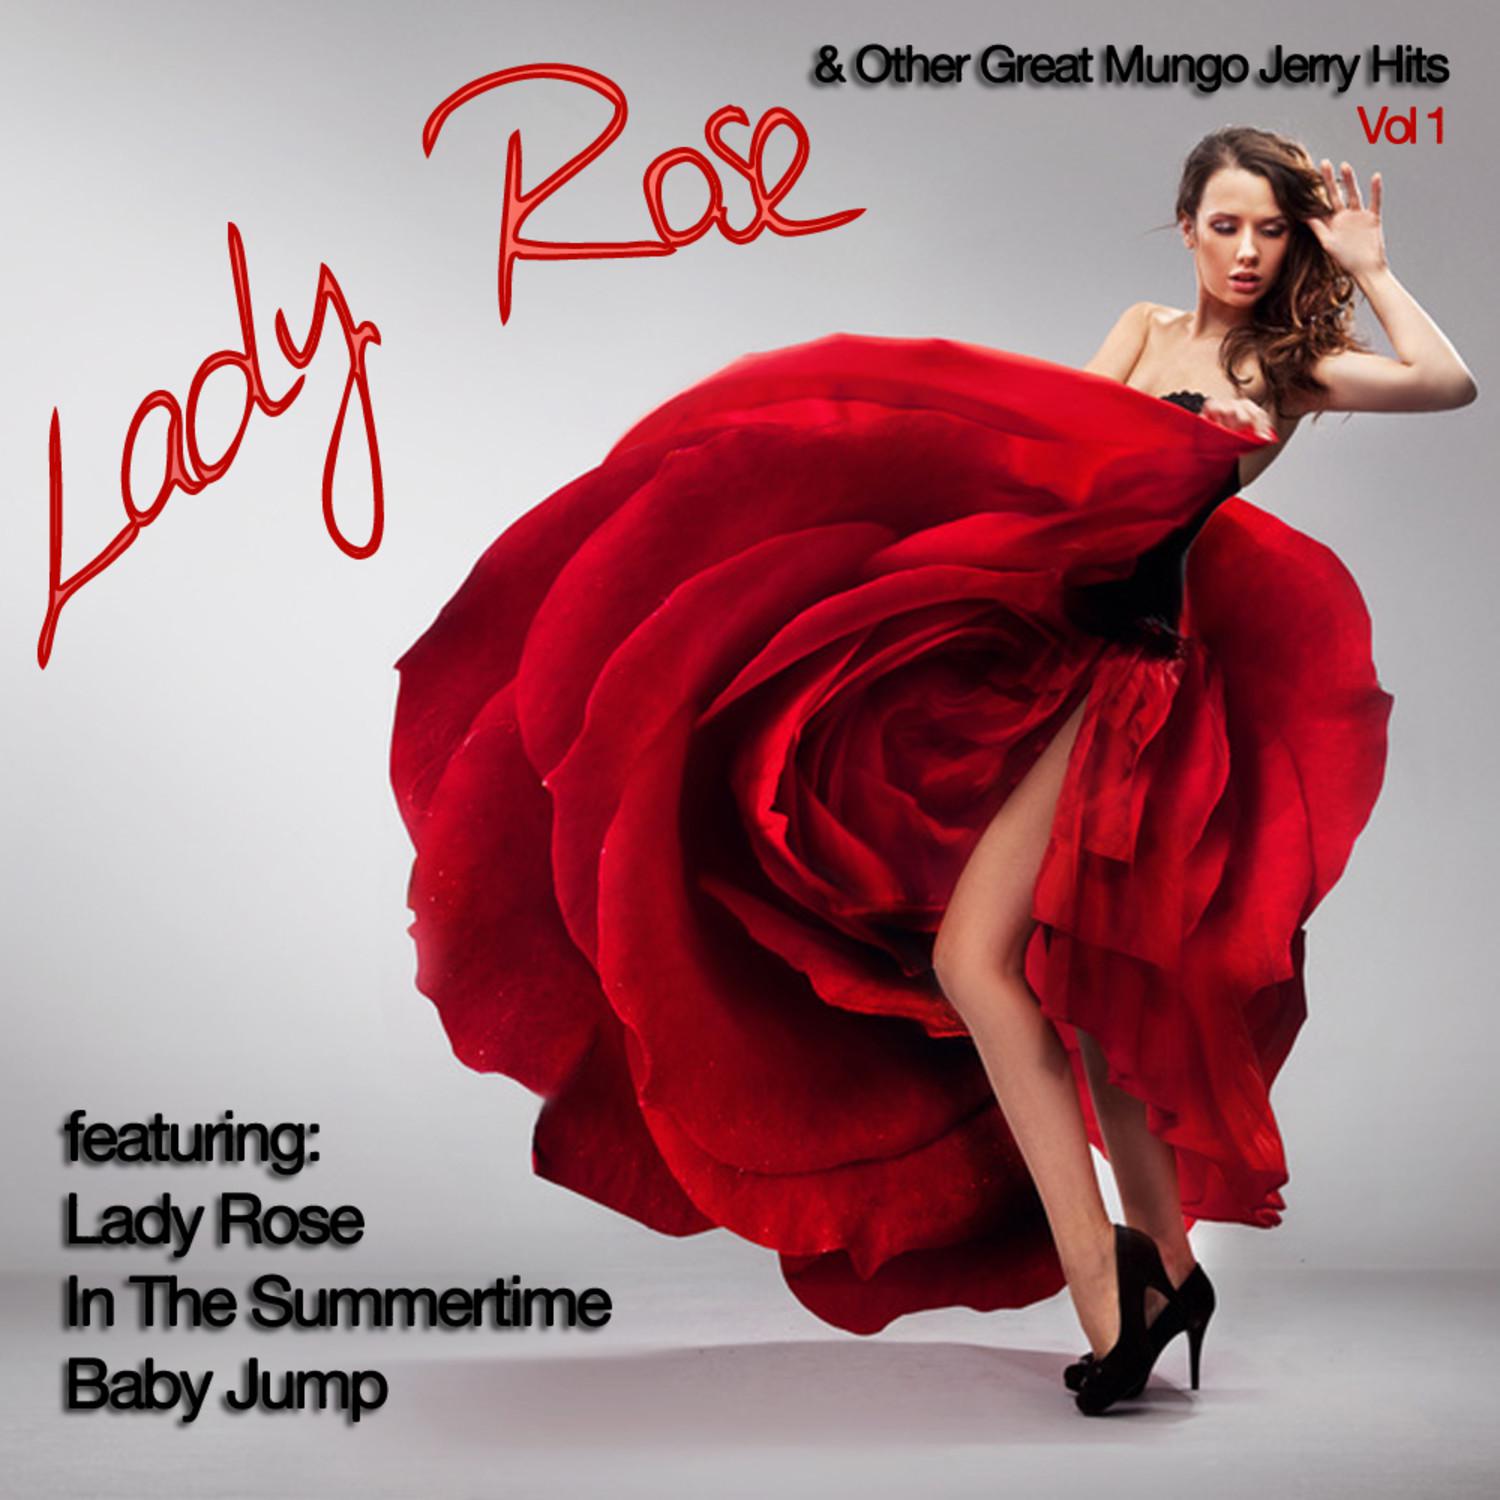 Lady Rose And Other Great Mungo Jerry Hits Vol 1